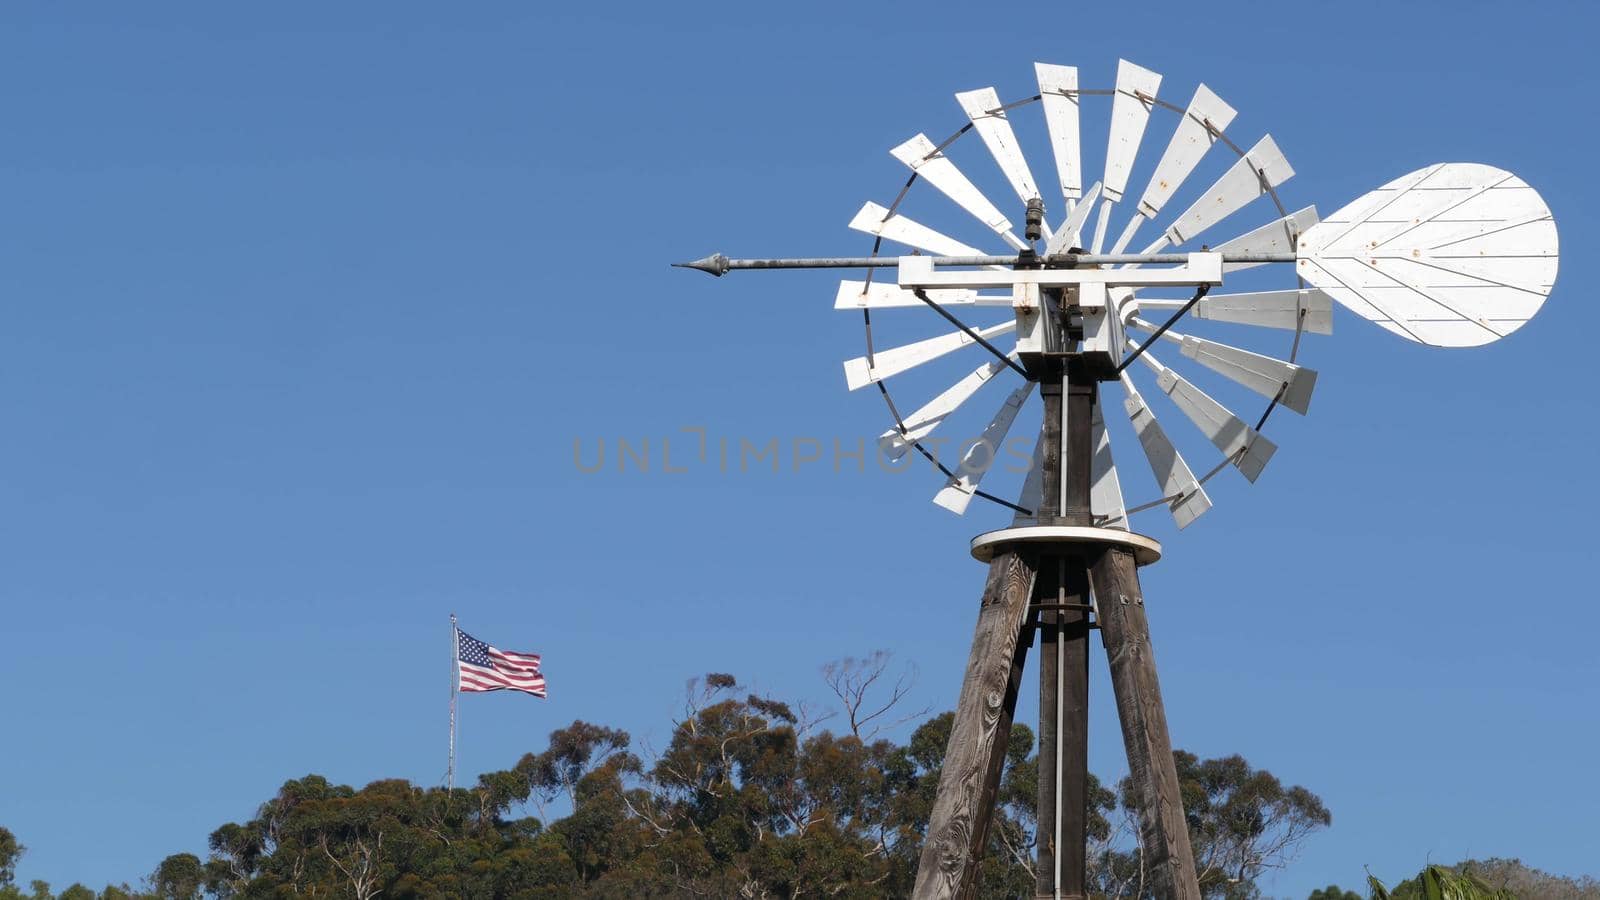 Classic retro windmill, bladed rotor and USA flag against blue sky. Vintage water pump wind turbine, power generator on livestock ranch or agricultural farm. Rural symbol of wild west, rustic suburb by DogoraSun